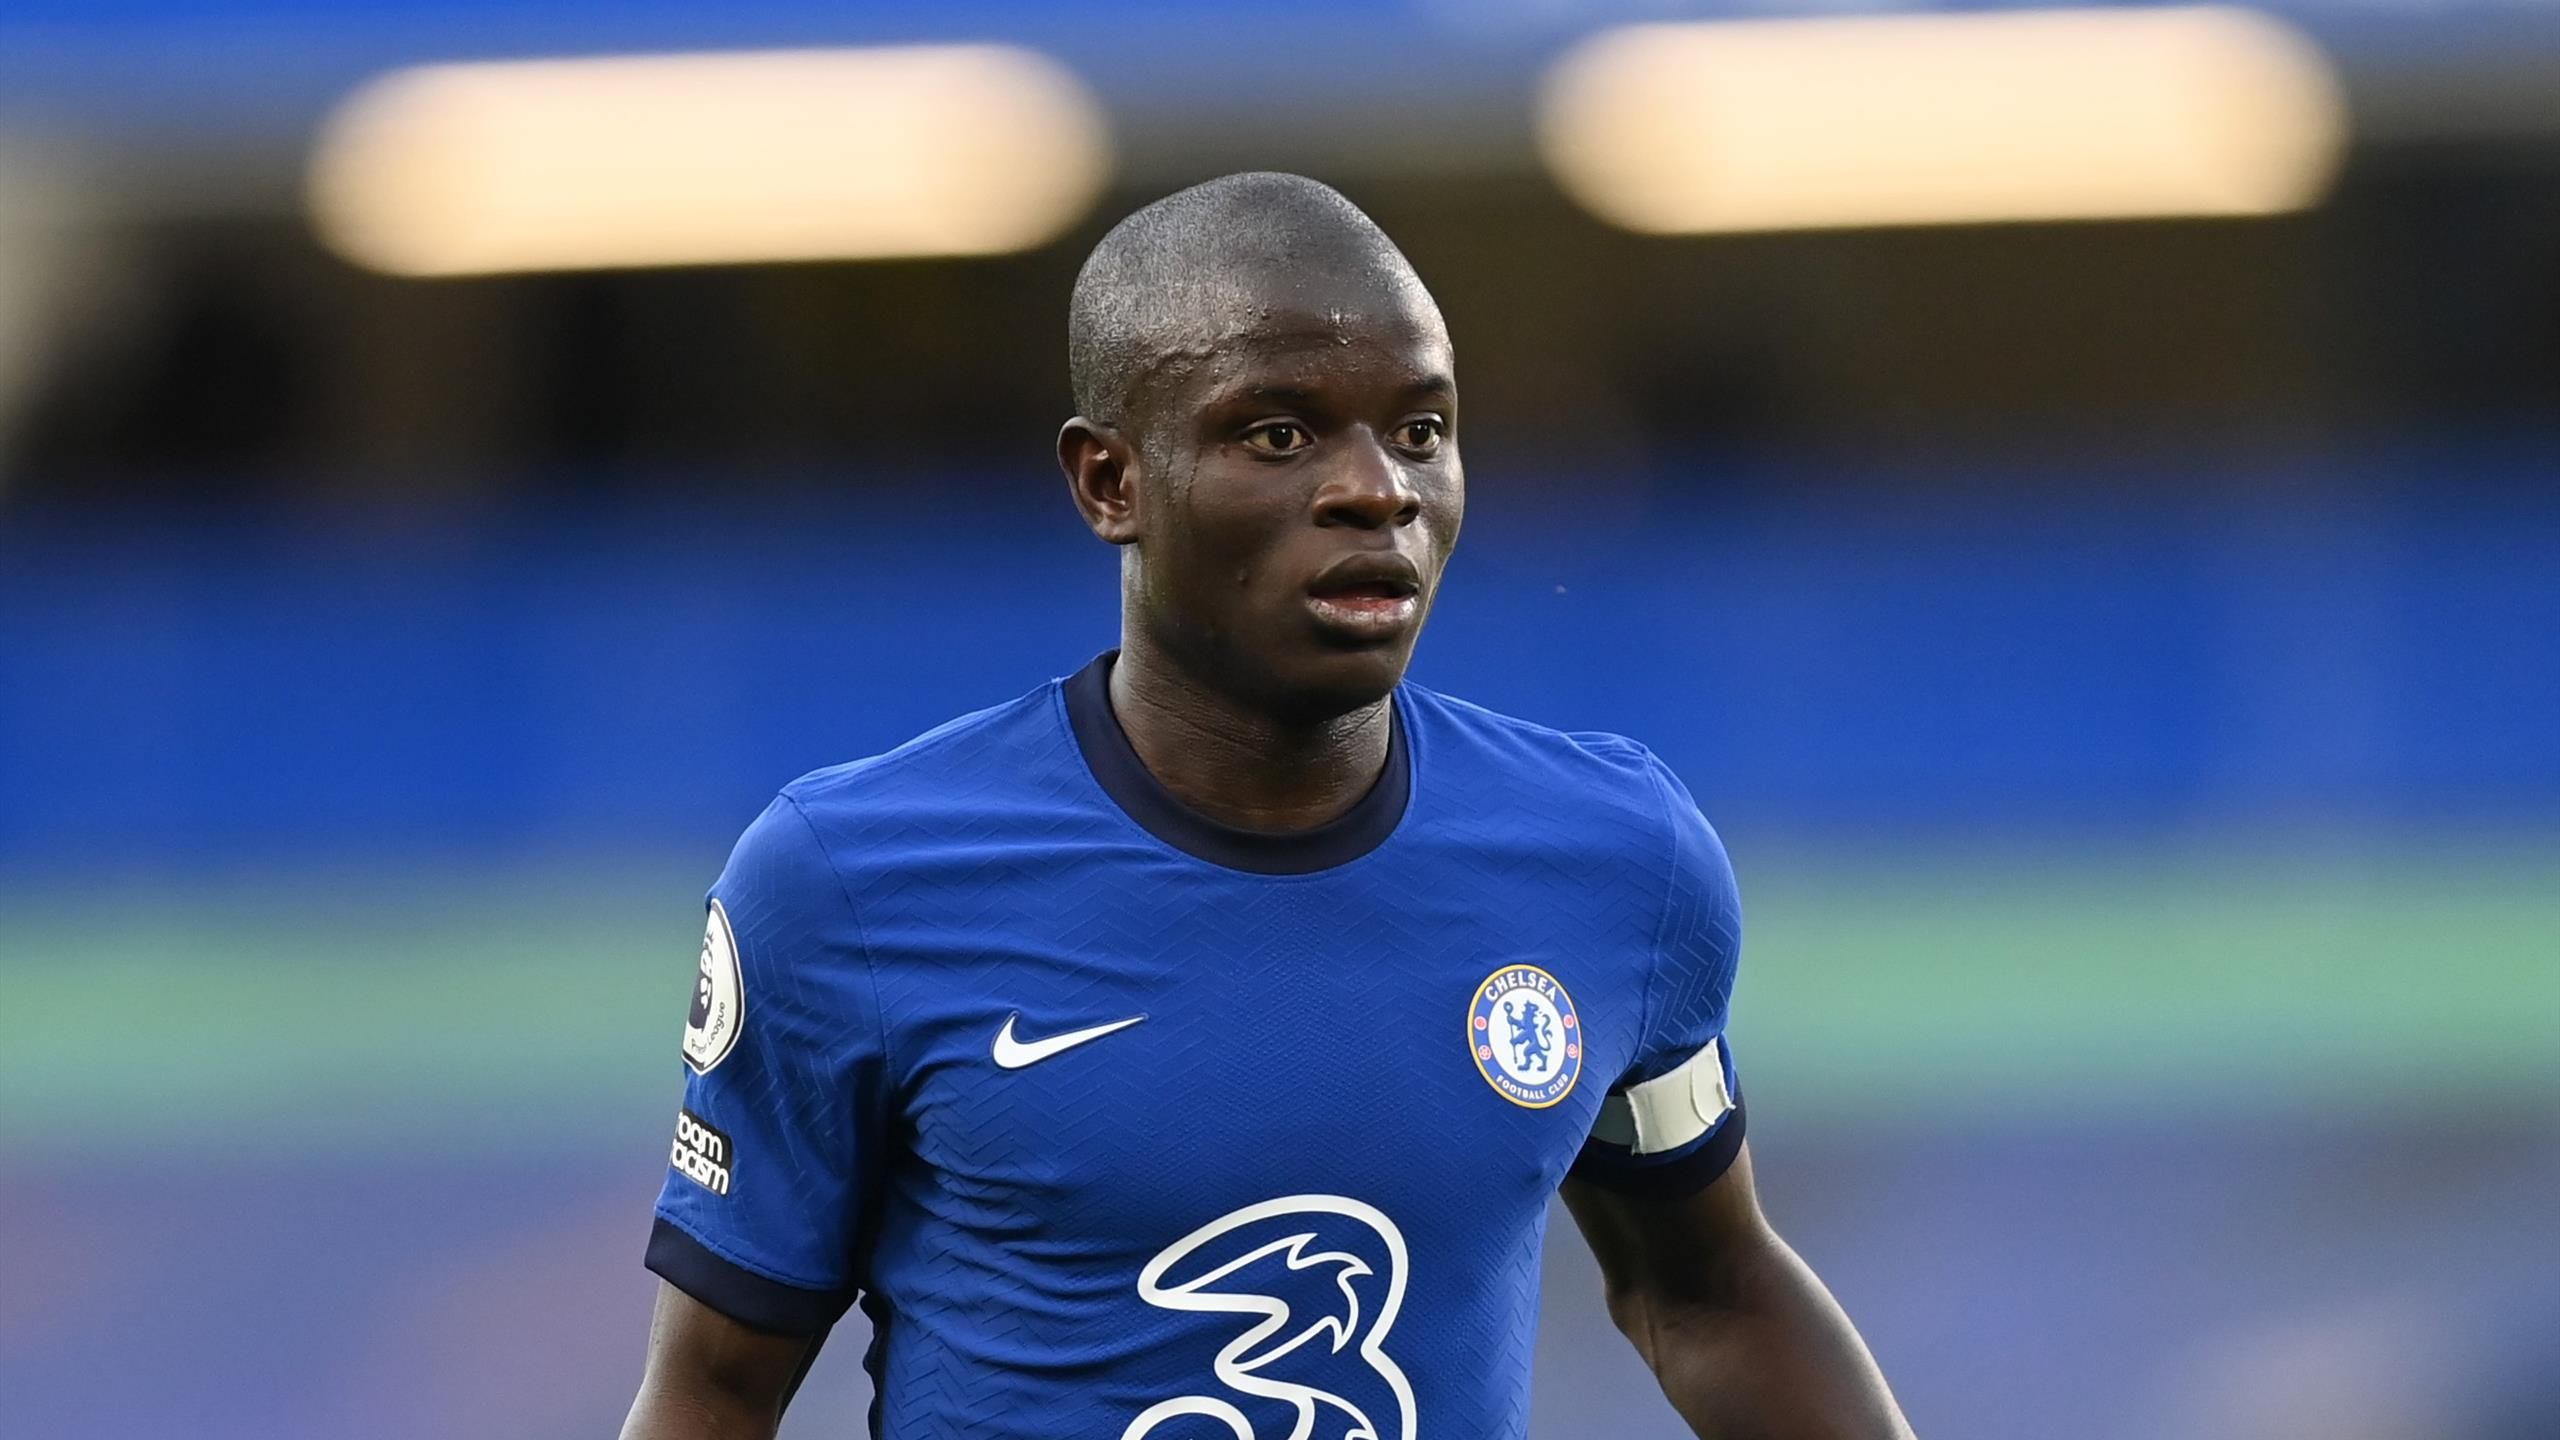 Manchester United launch audacious attempt to sign Chelsea's N'Golo Kante